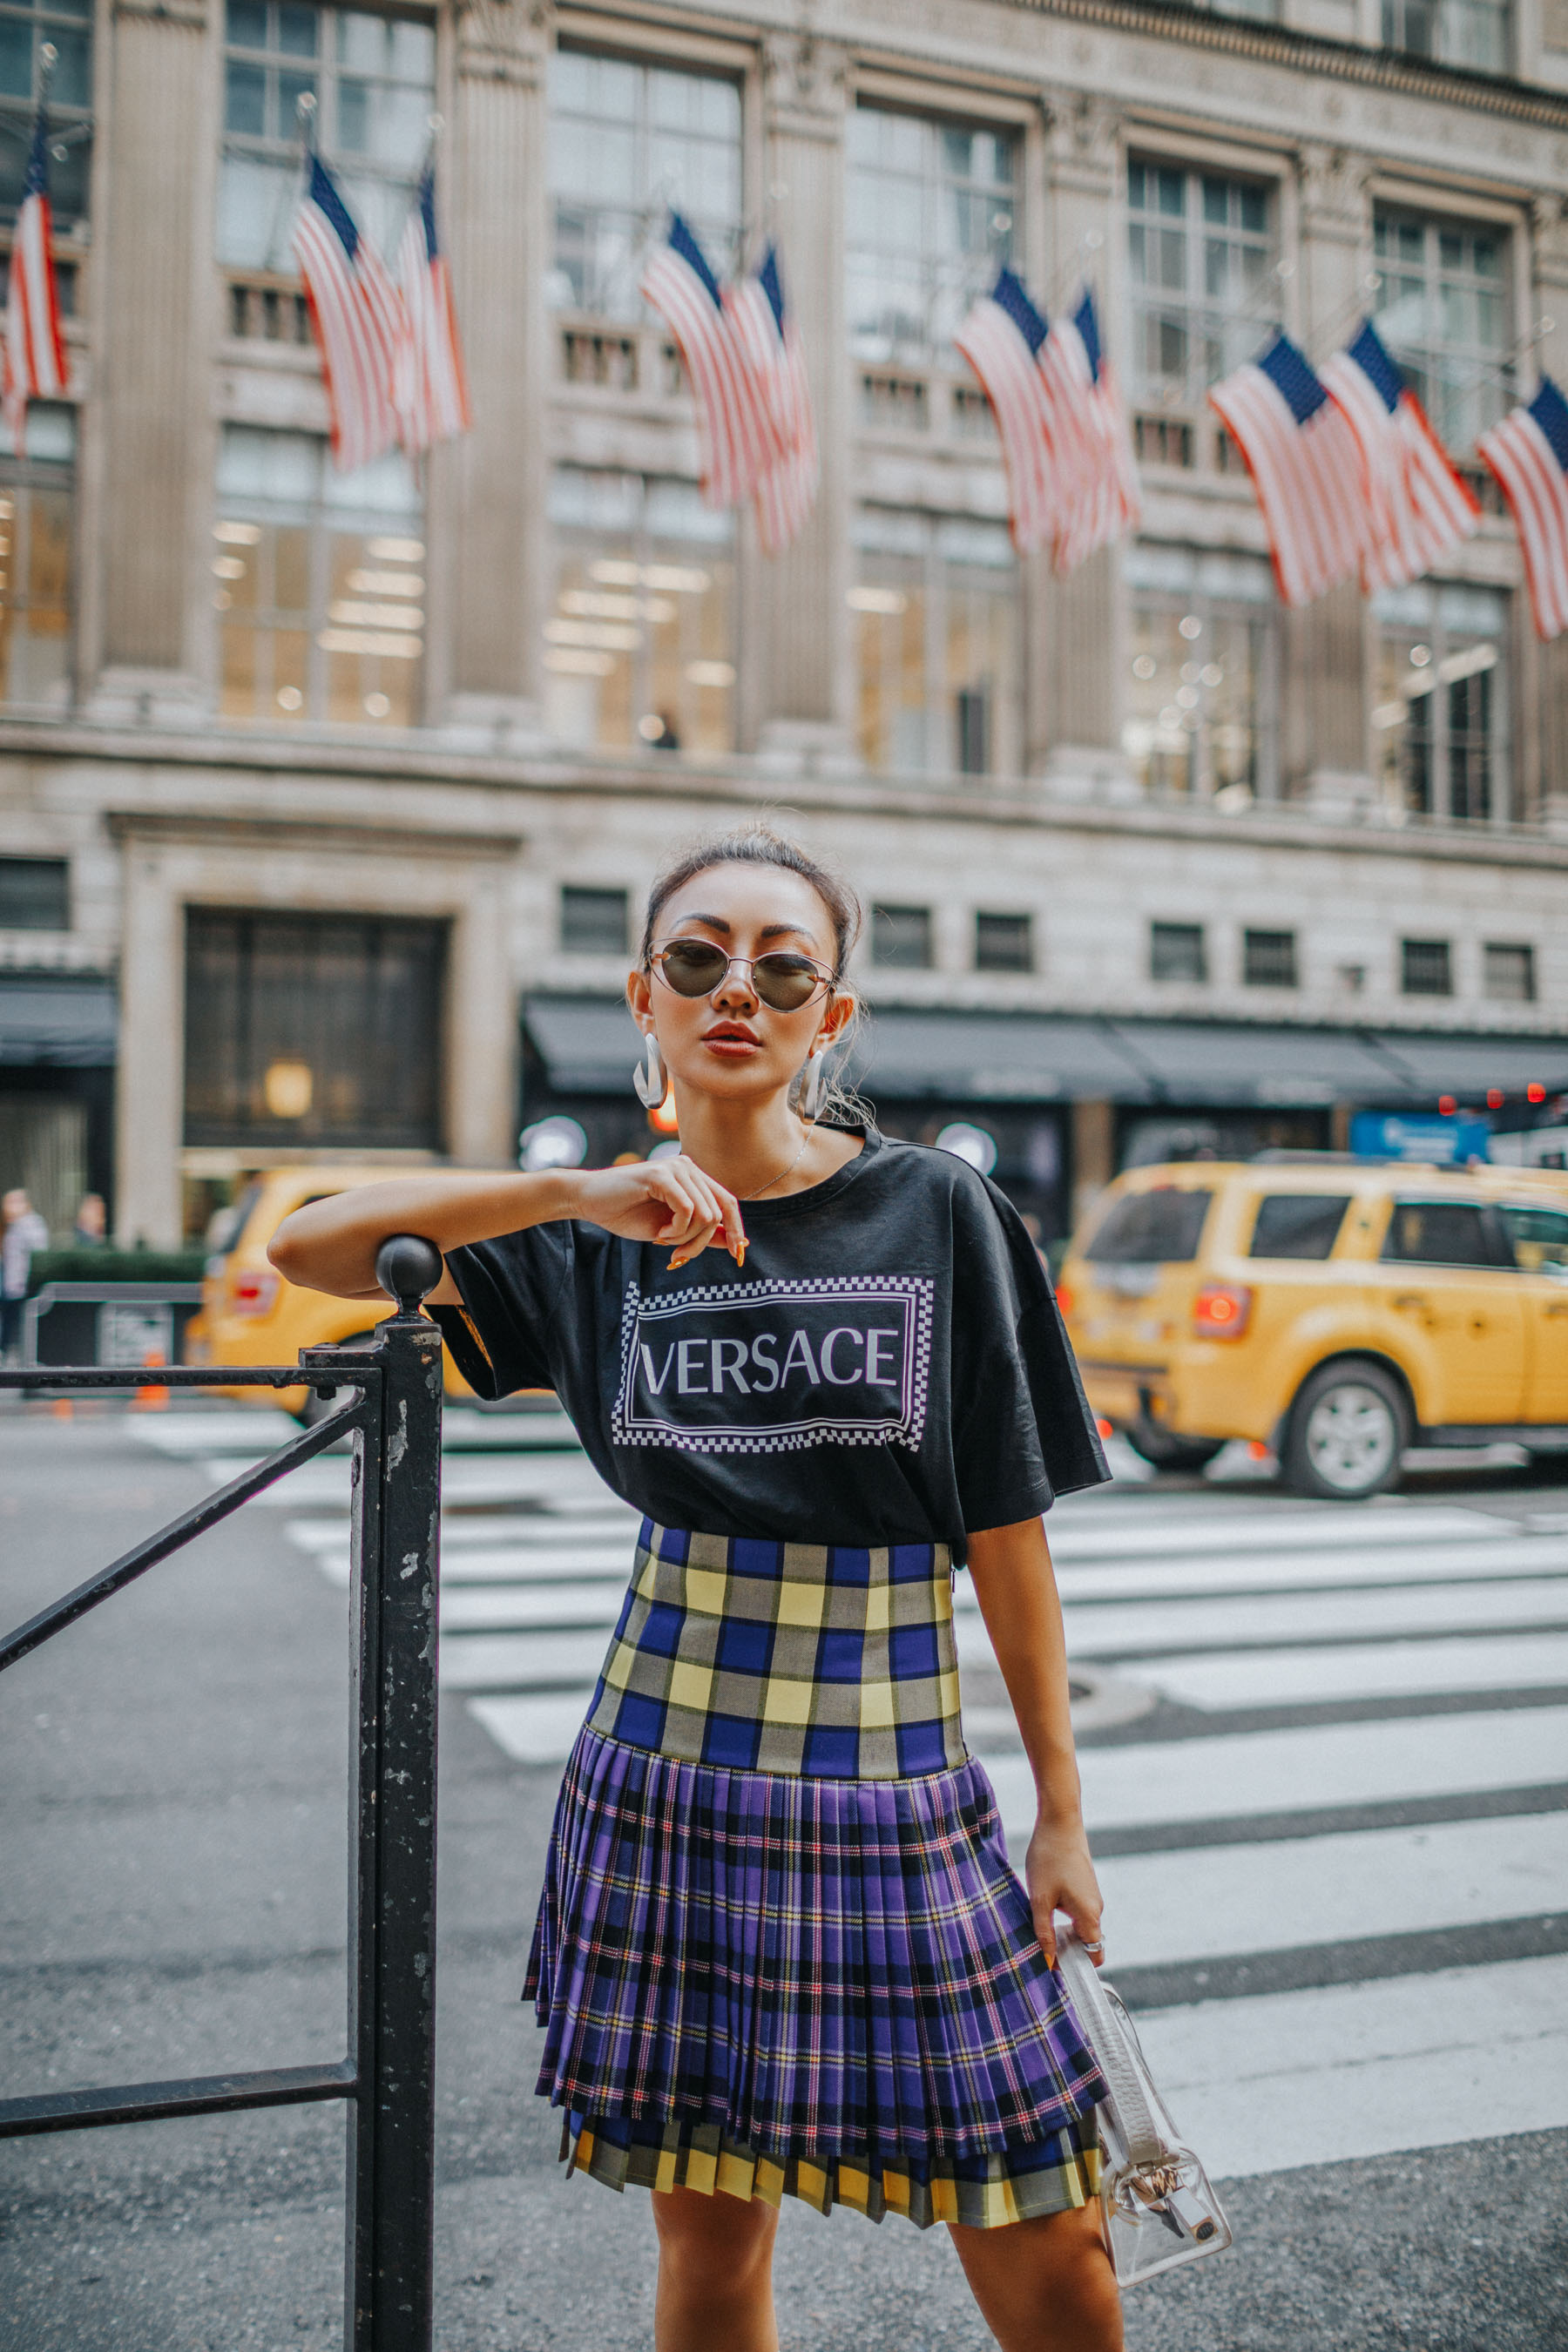 back to school outfits, Versace Tee, Plaid Skirt, White Boots // Notjessfashion.com